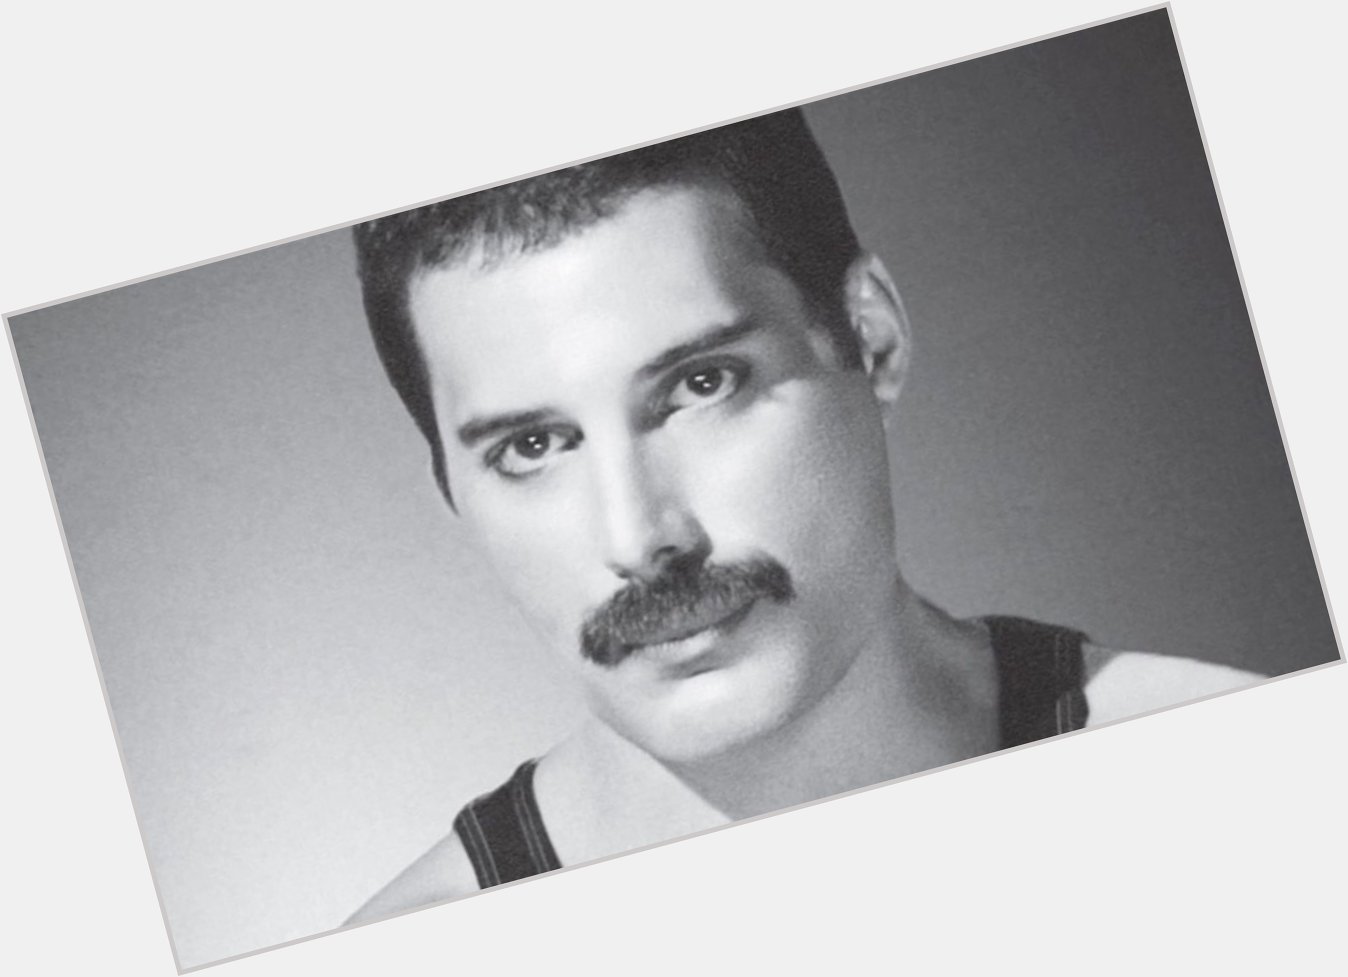 Happy birthday Freddie Mercury. He would have been 72 today  